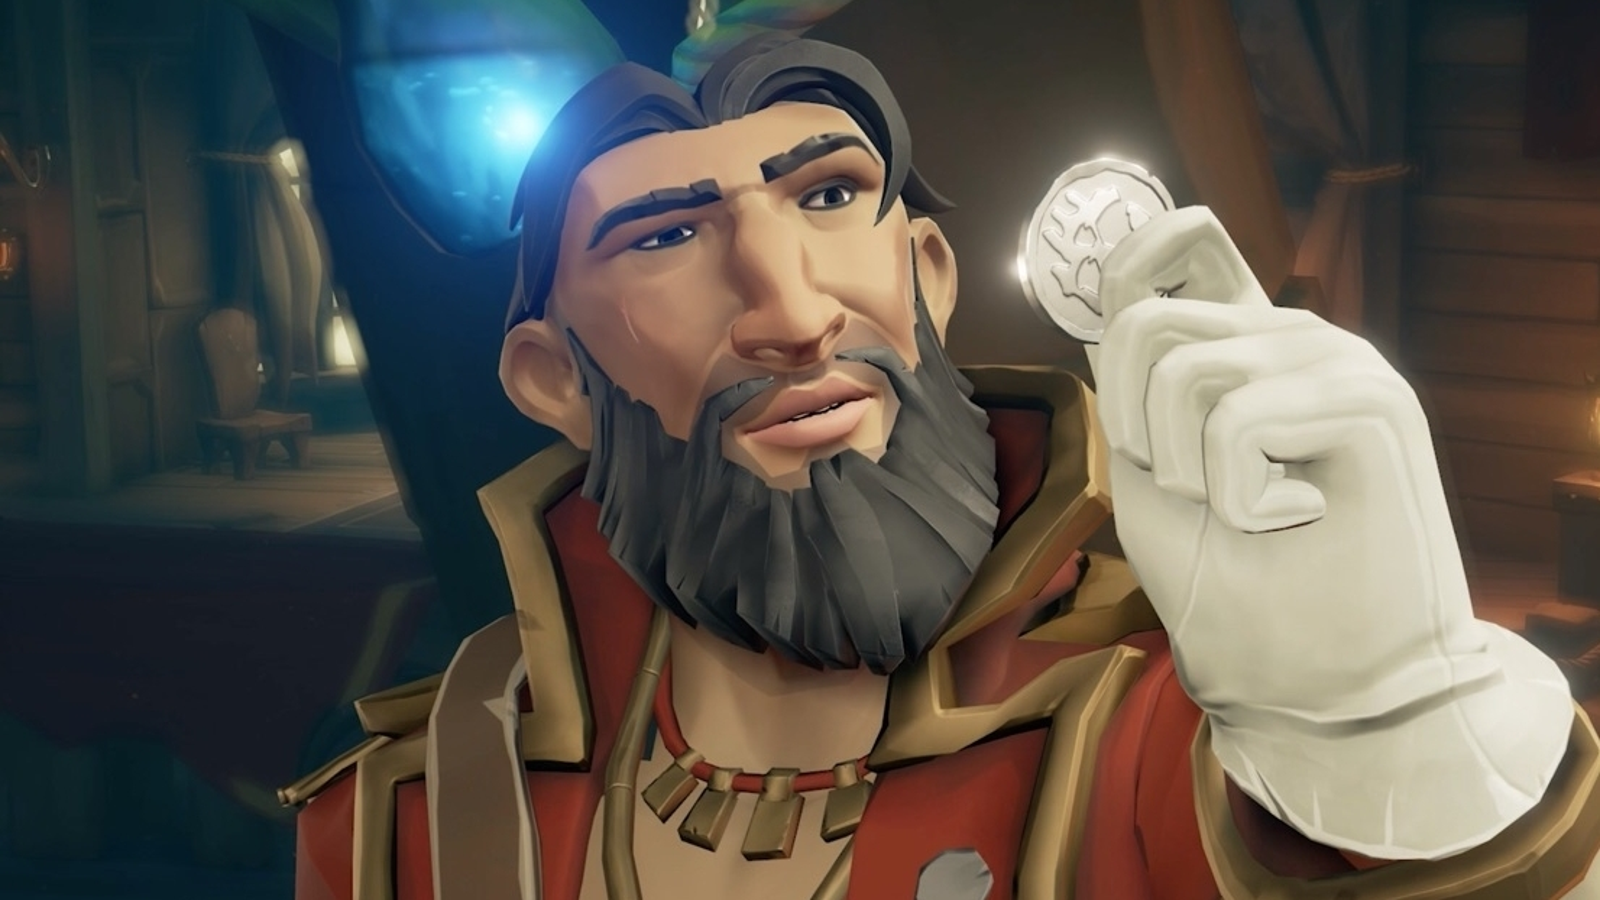 Sea of Thieves will introduce PvP-free servers, 24-player guilds and  competitive treasure hunts in Season 10